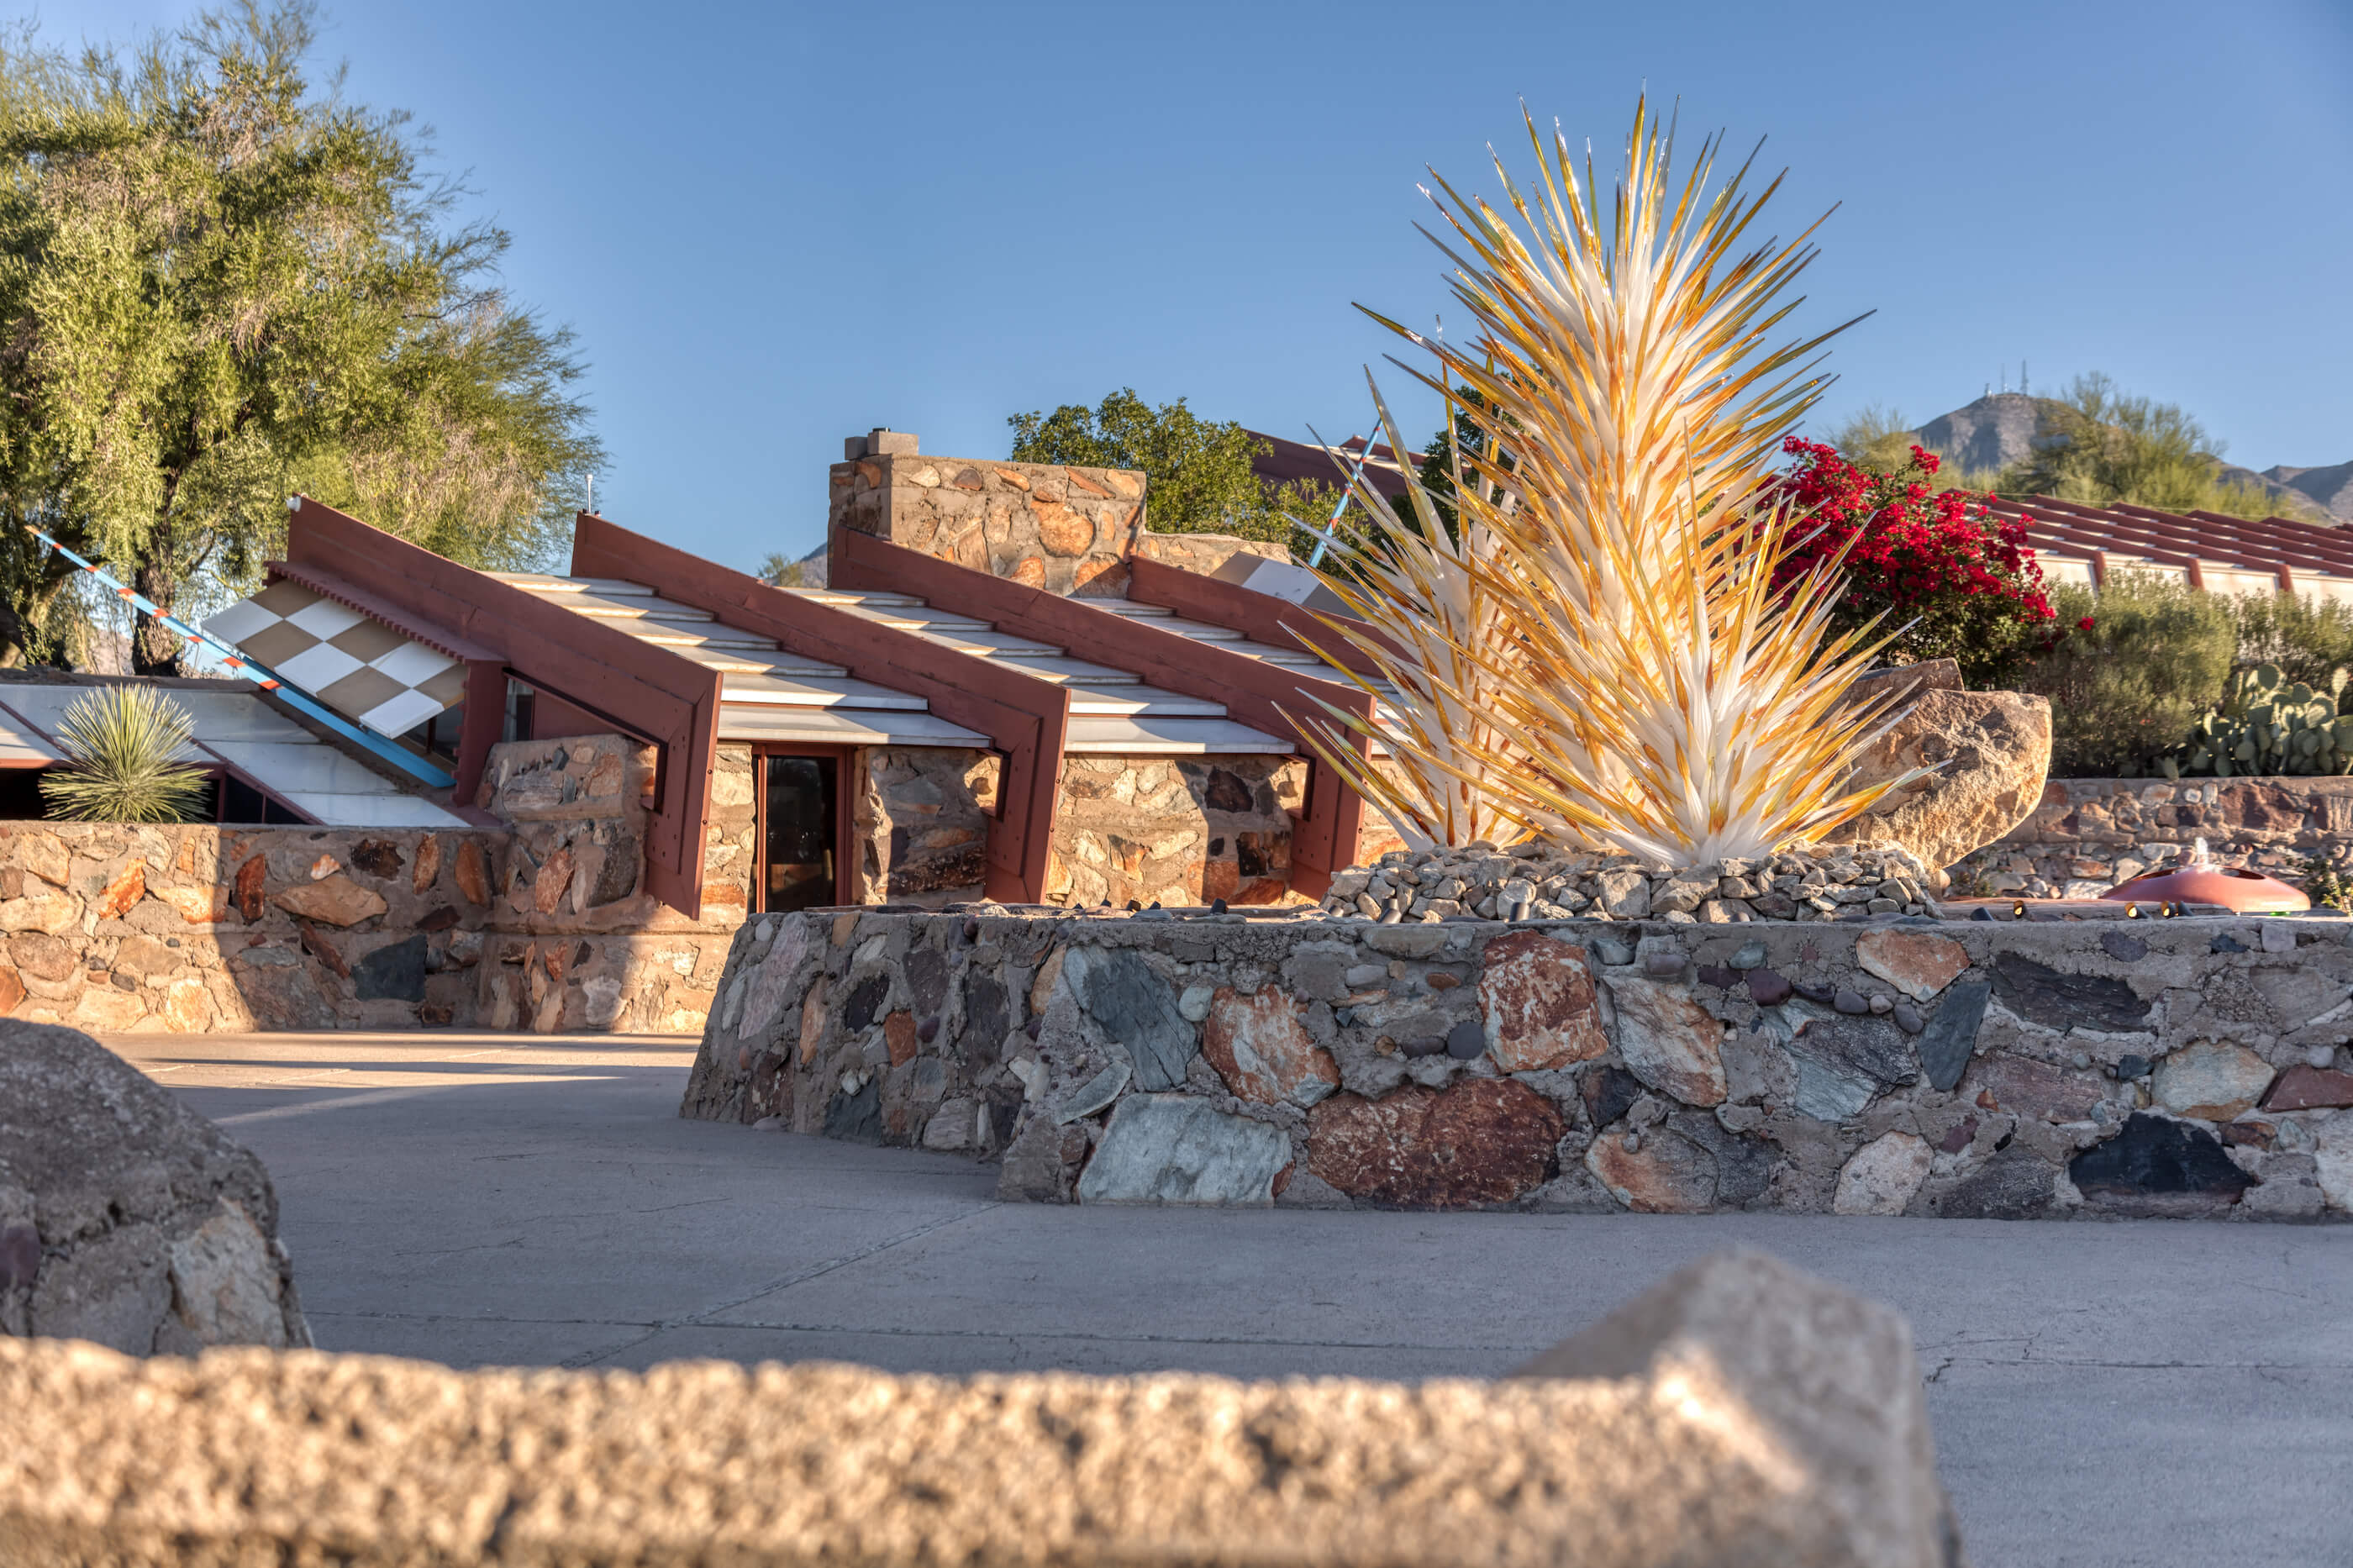 a monumental sculpture by dale chihuly at the entry to plaza to taliesin west in arizona